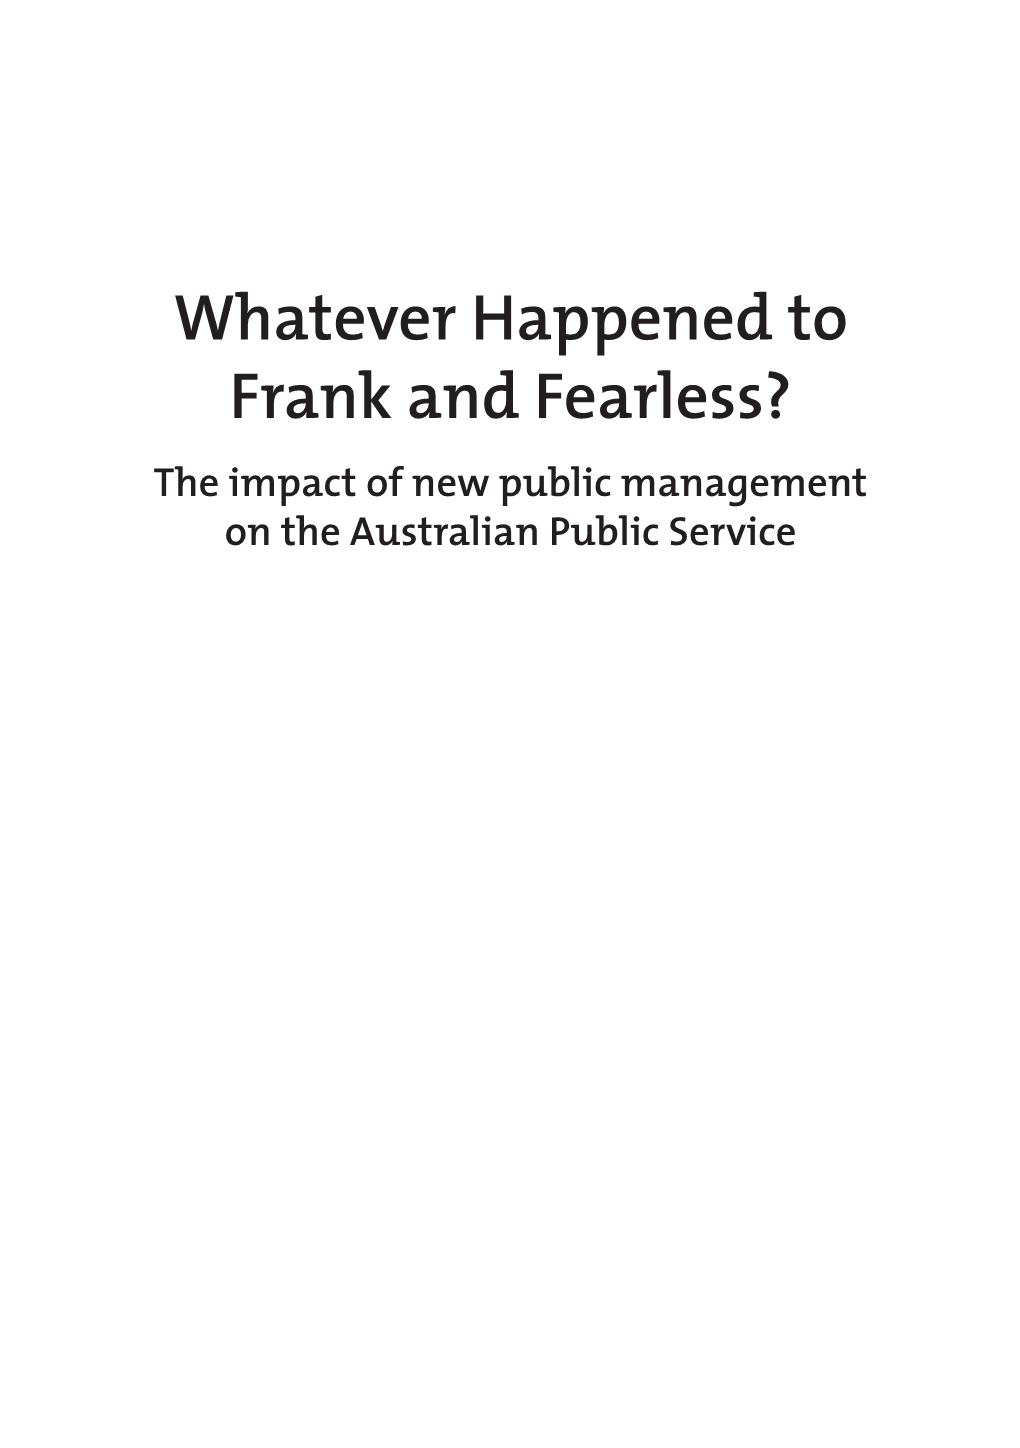 Whatever Happened to Frank and Fearless? the Impact of New Public Management on the Australian Public Service